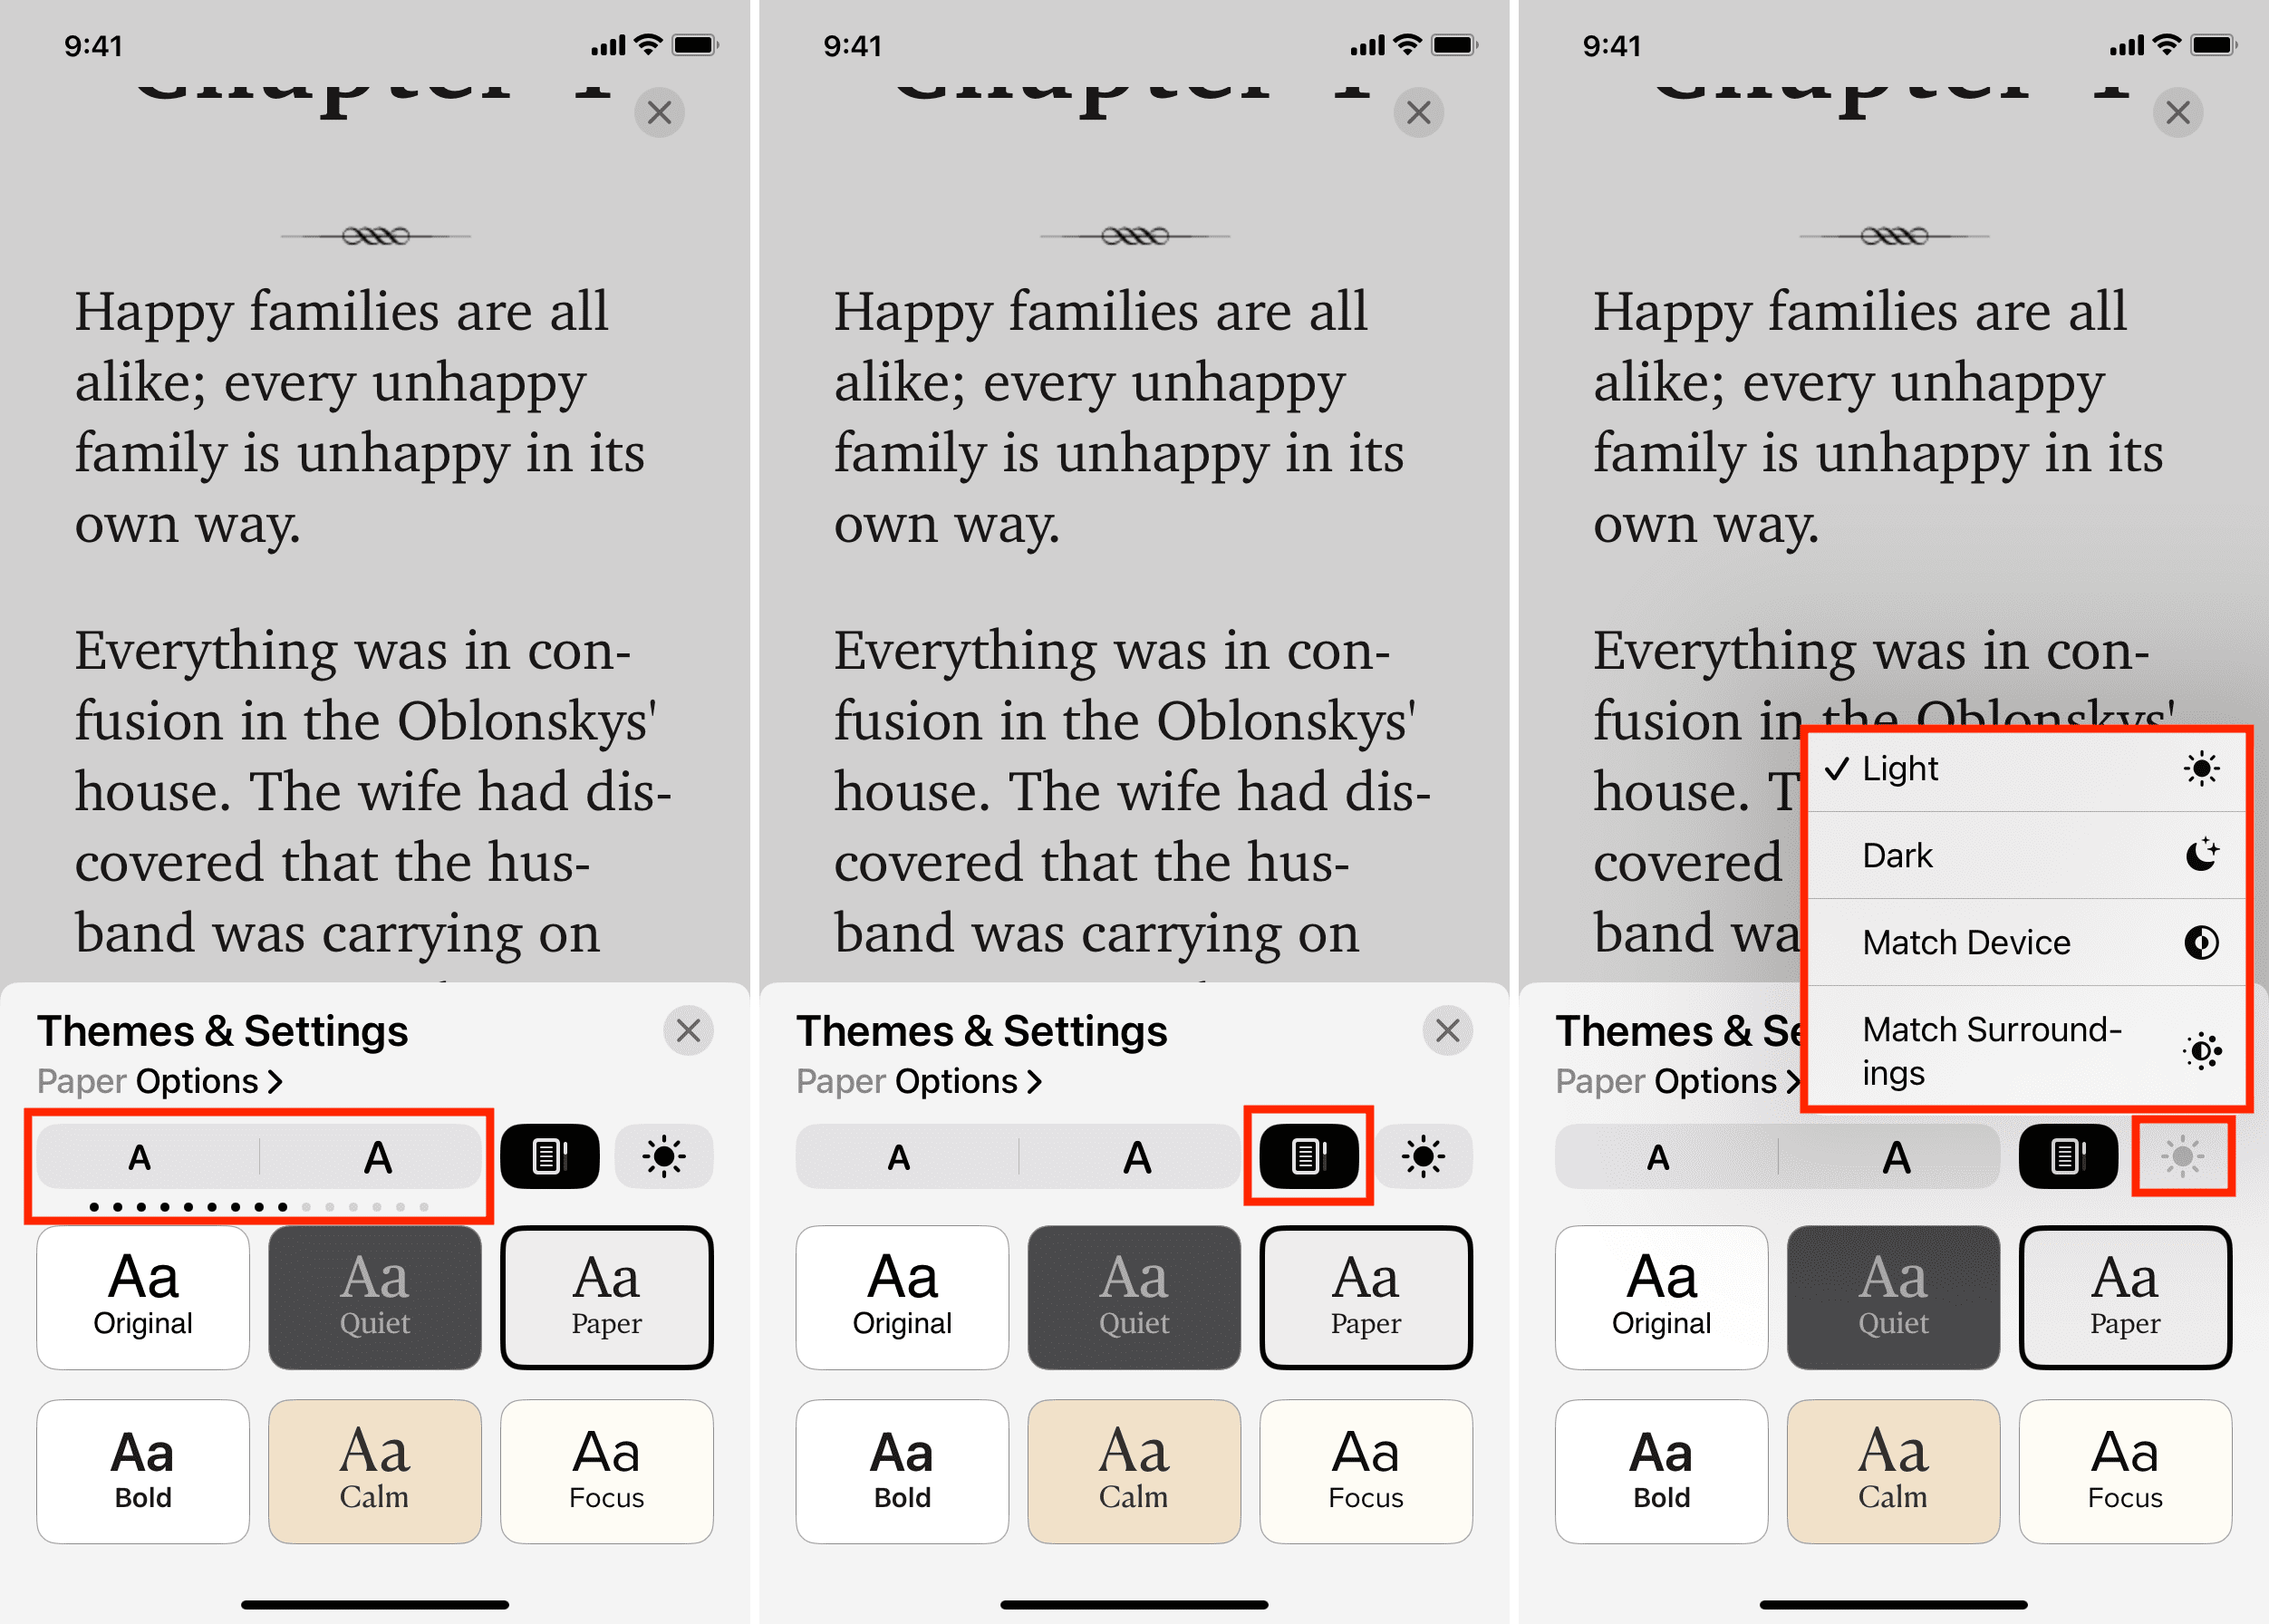 Other customization options like text size, vertical scrolling, and dark mode in Books app on iPhone